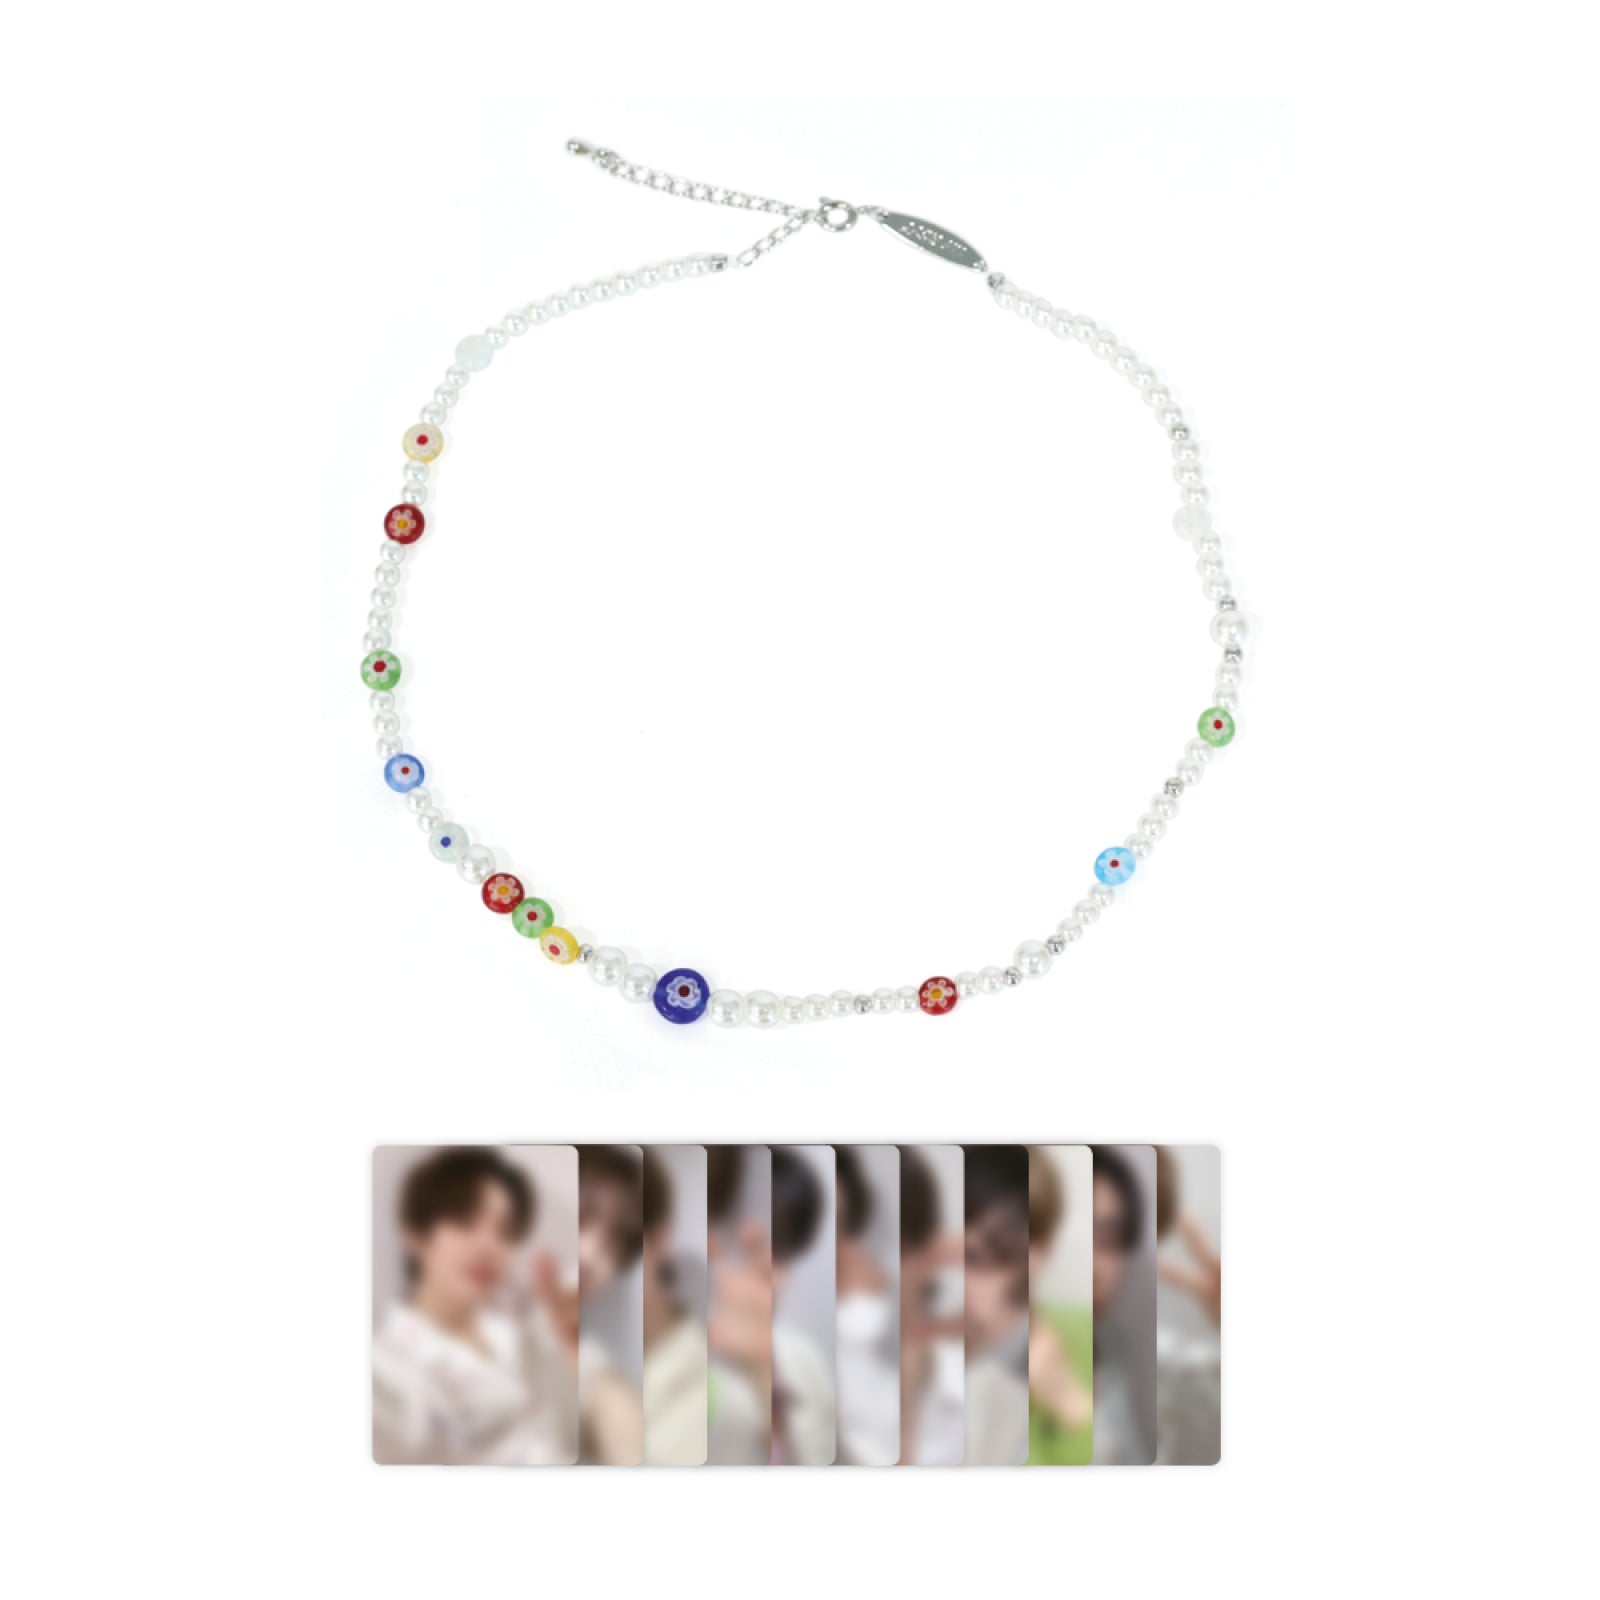 THE BOYZ - PHANTASY 2ND ALBUM OFFICIAL POP UP MD BEADS NECKLACE - COKODIVE